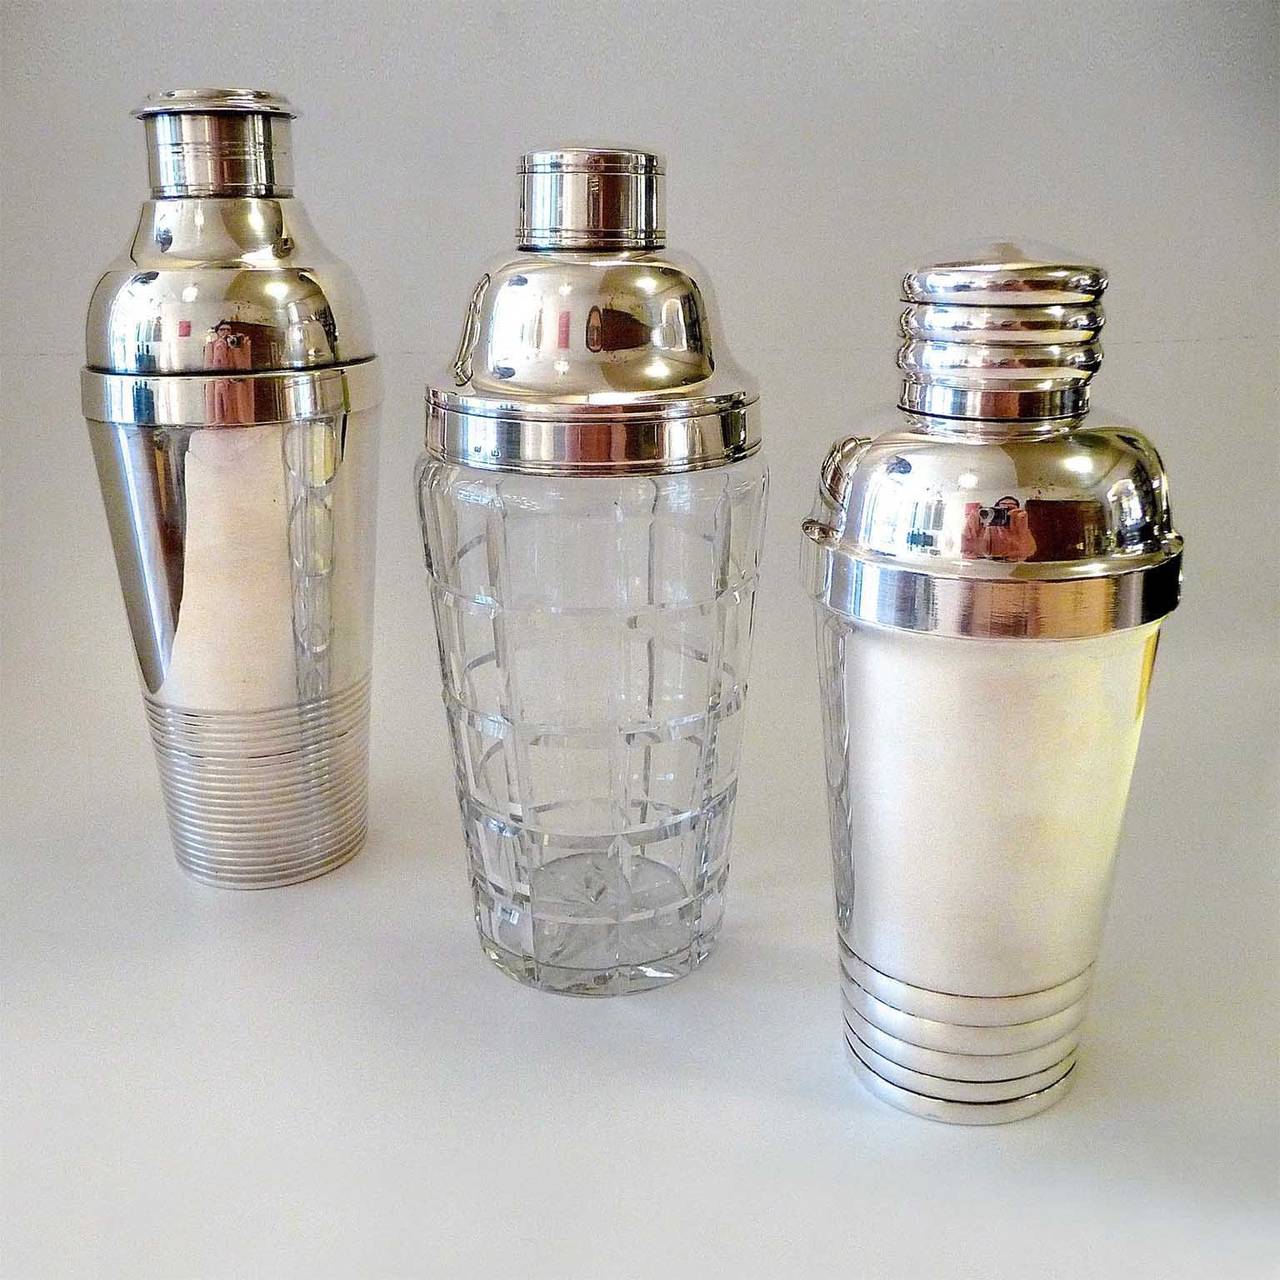 A wonderful selection of three Art Deco cocktail shakers:
Christofle, Saglier Freres, Udner (from left to right).

Christofle Gallia cocktail Shaker:
Luc Lanel design
Silver plated metal.
Marked 